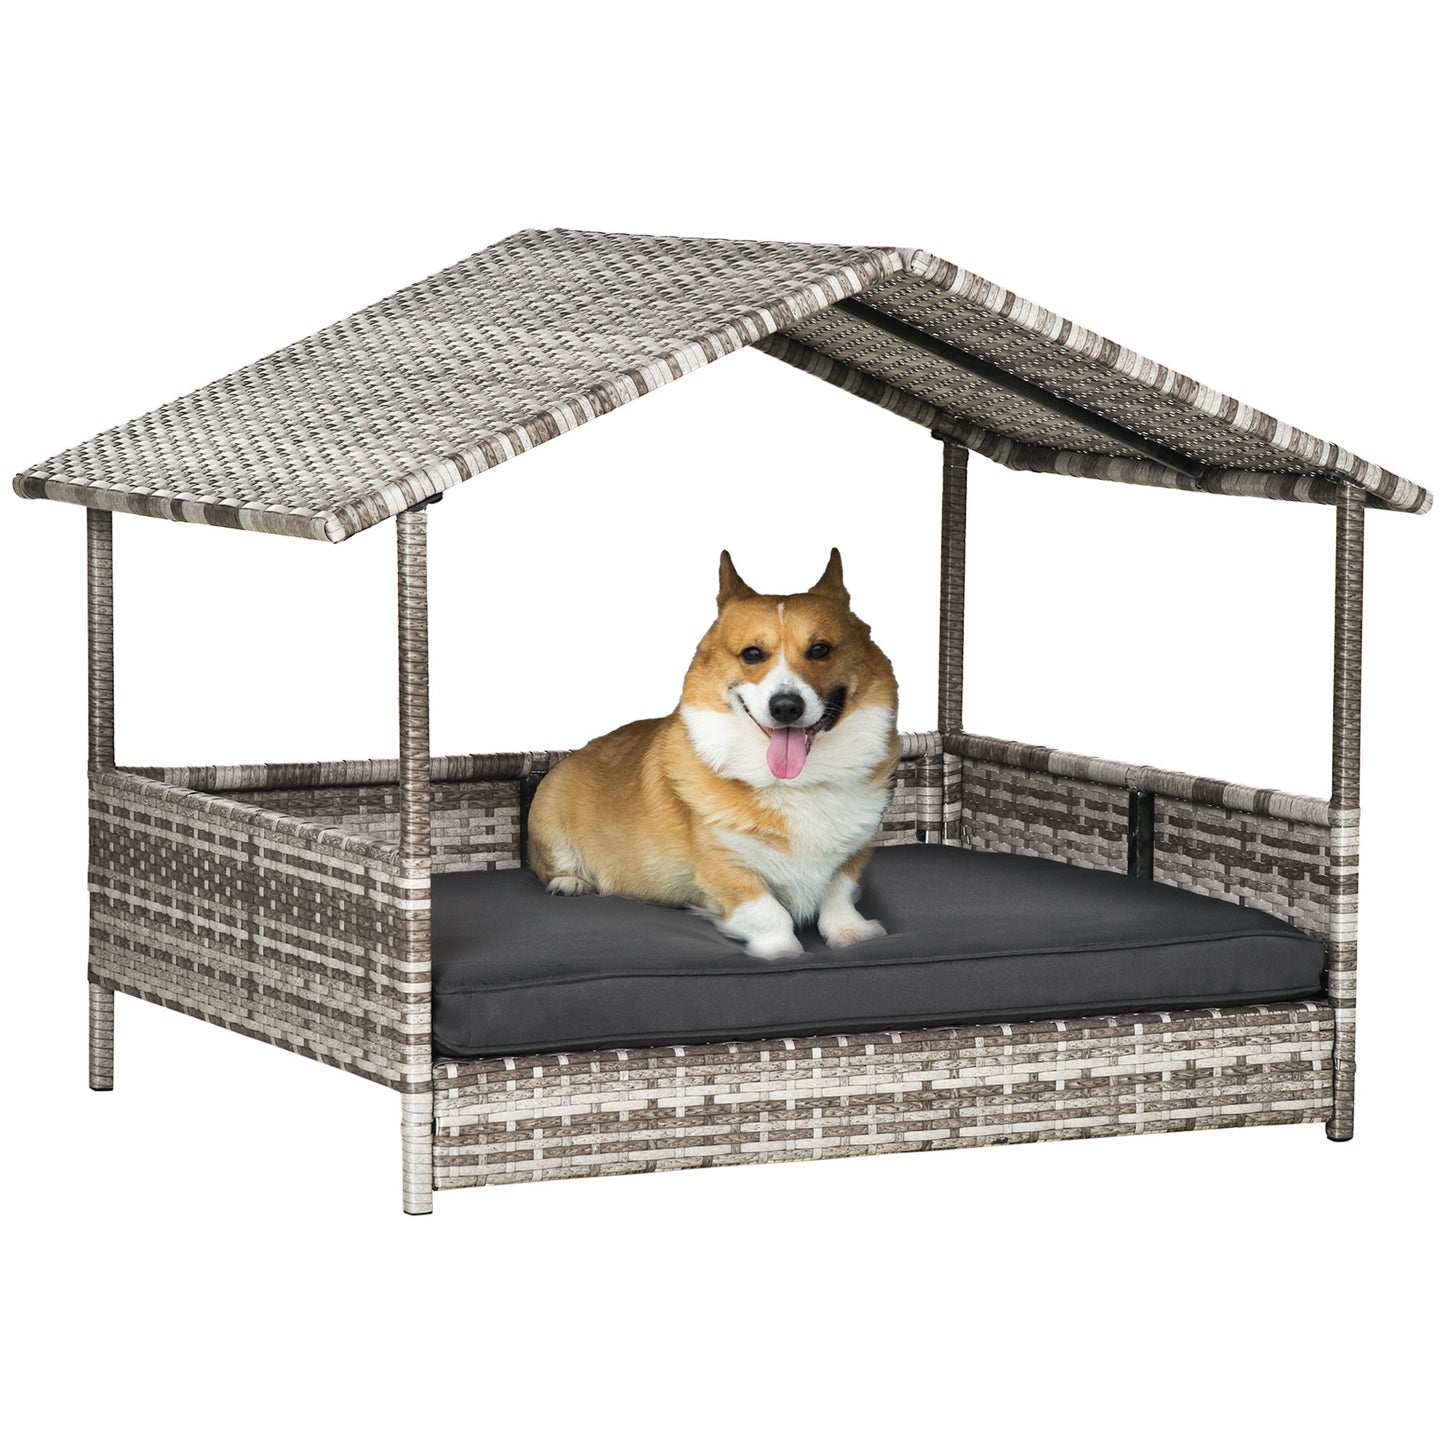 Pet Supplies-Wicker Dog House Elevated Raised Rattan Bed for Indoor/Outdoor with Removable Cushion Lounge, Charcoal Grey - Outdoor Style Company